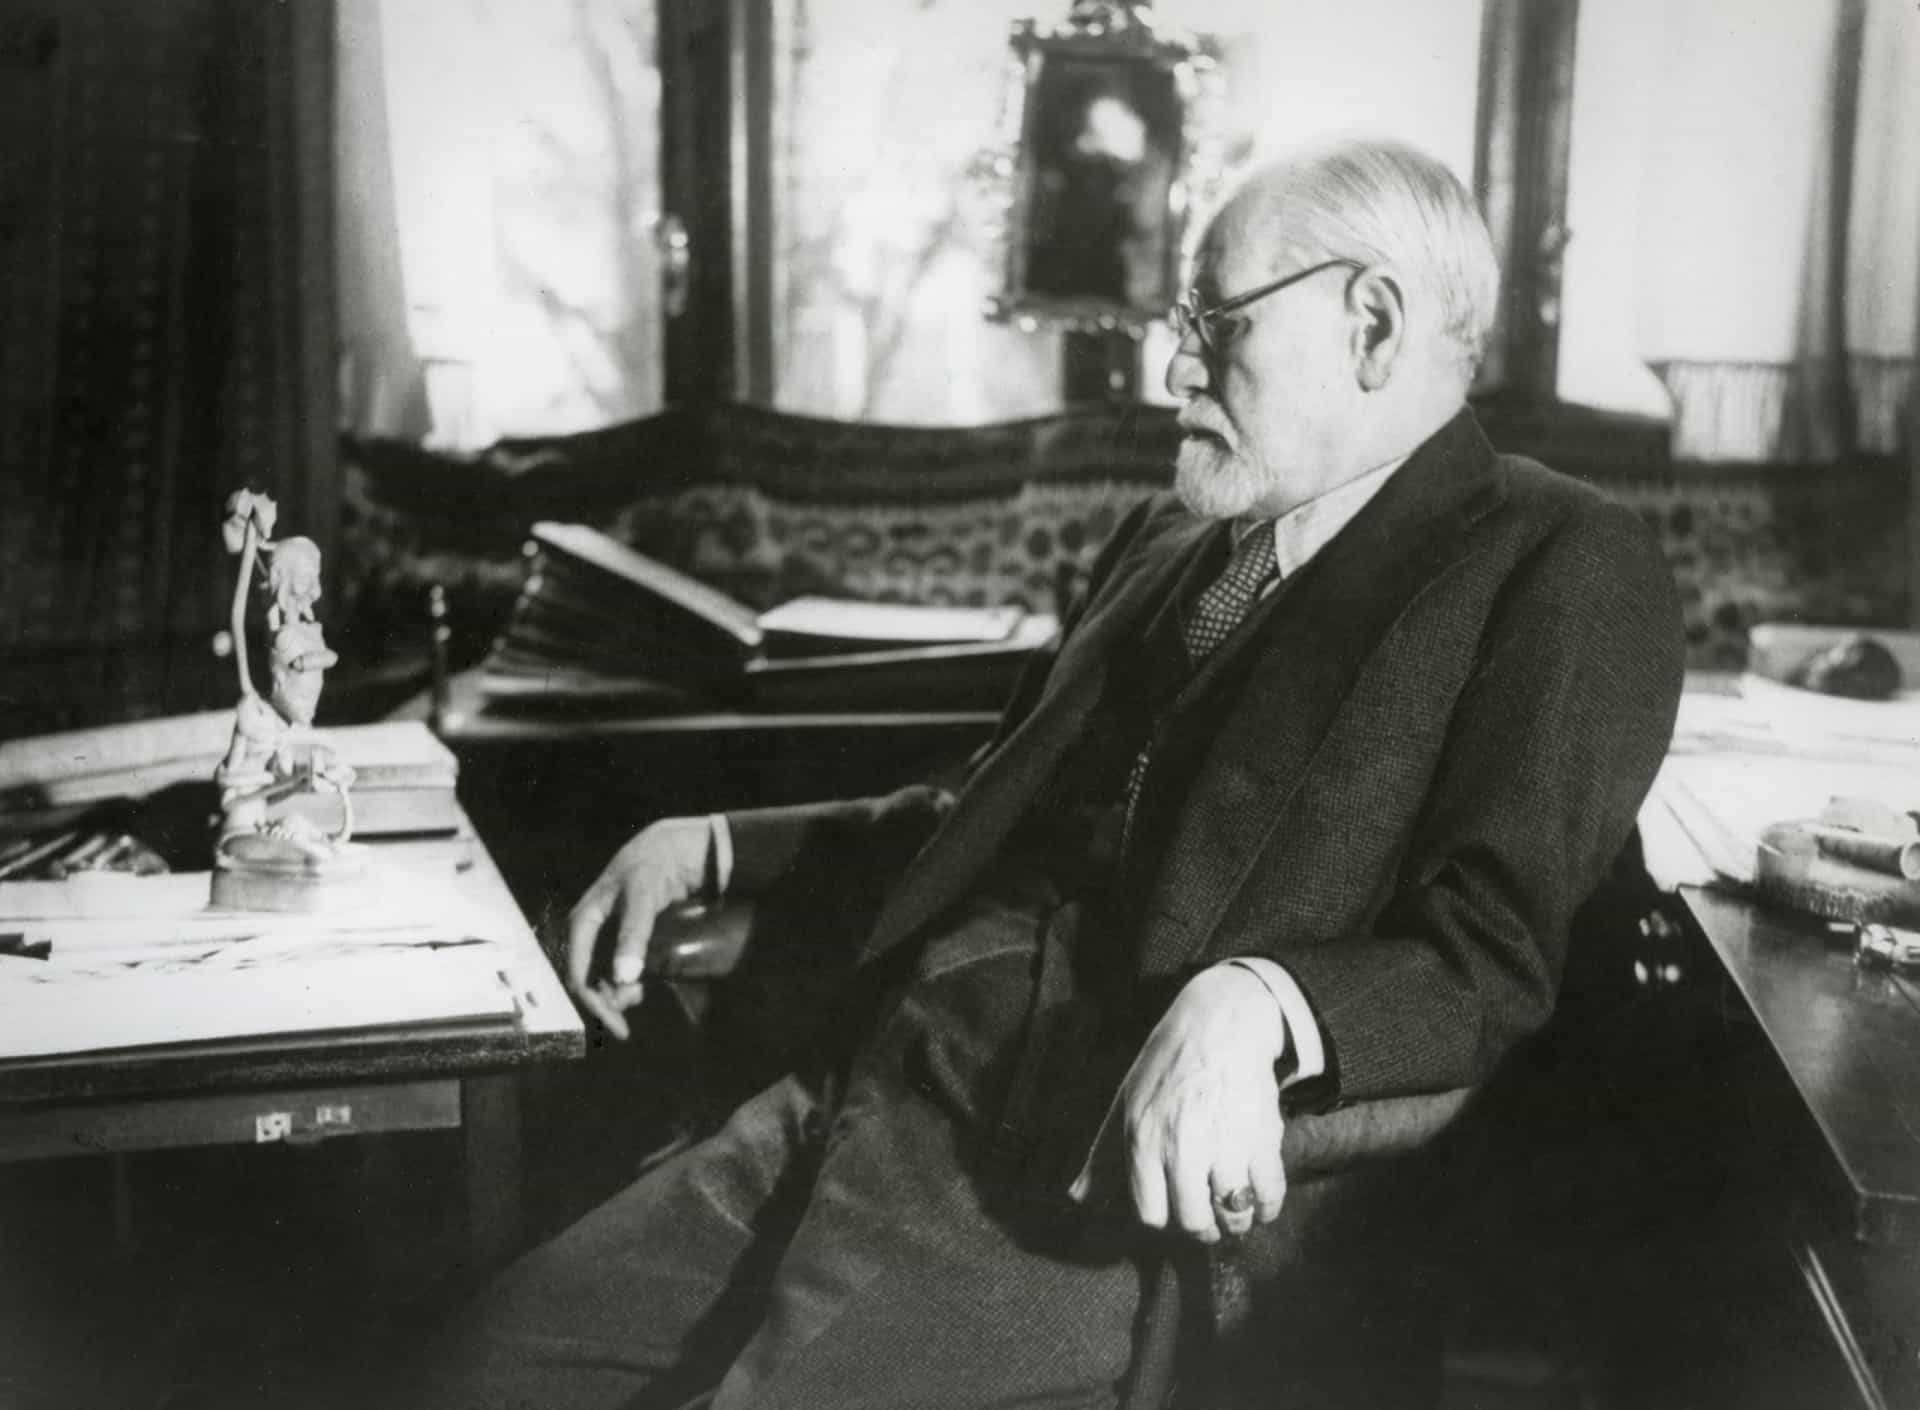 Historians now <a href="https://www.pbs.org/newshour/show/cocaine-how-miracle-drug-nearly-destroyed-sigmund-freud-william-halsted" rel="noopener">consider</a> what impact his personal use of the drug and his addiction may have had on his later work in psychology.